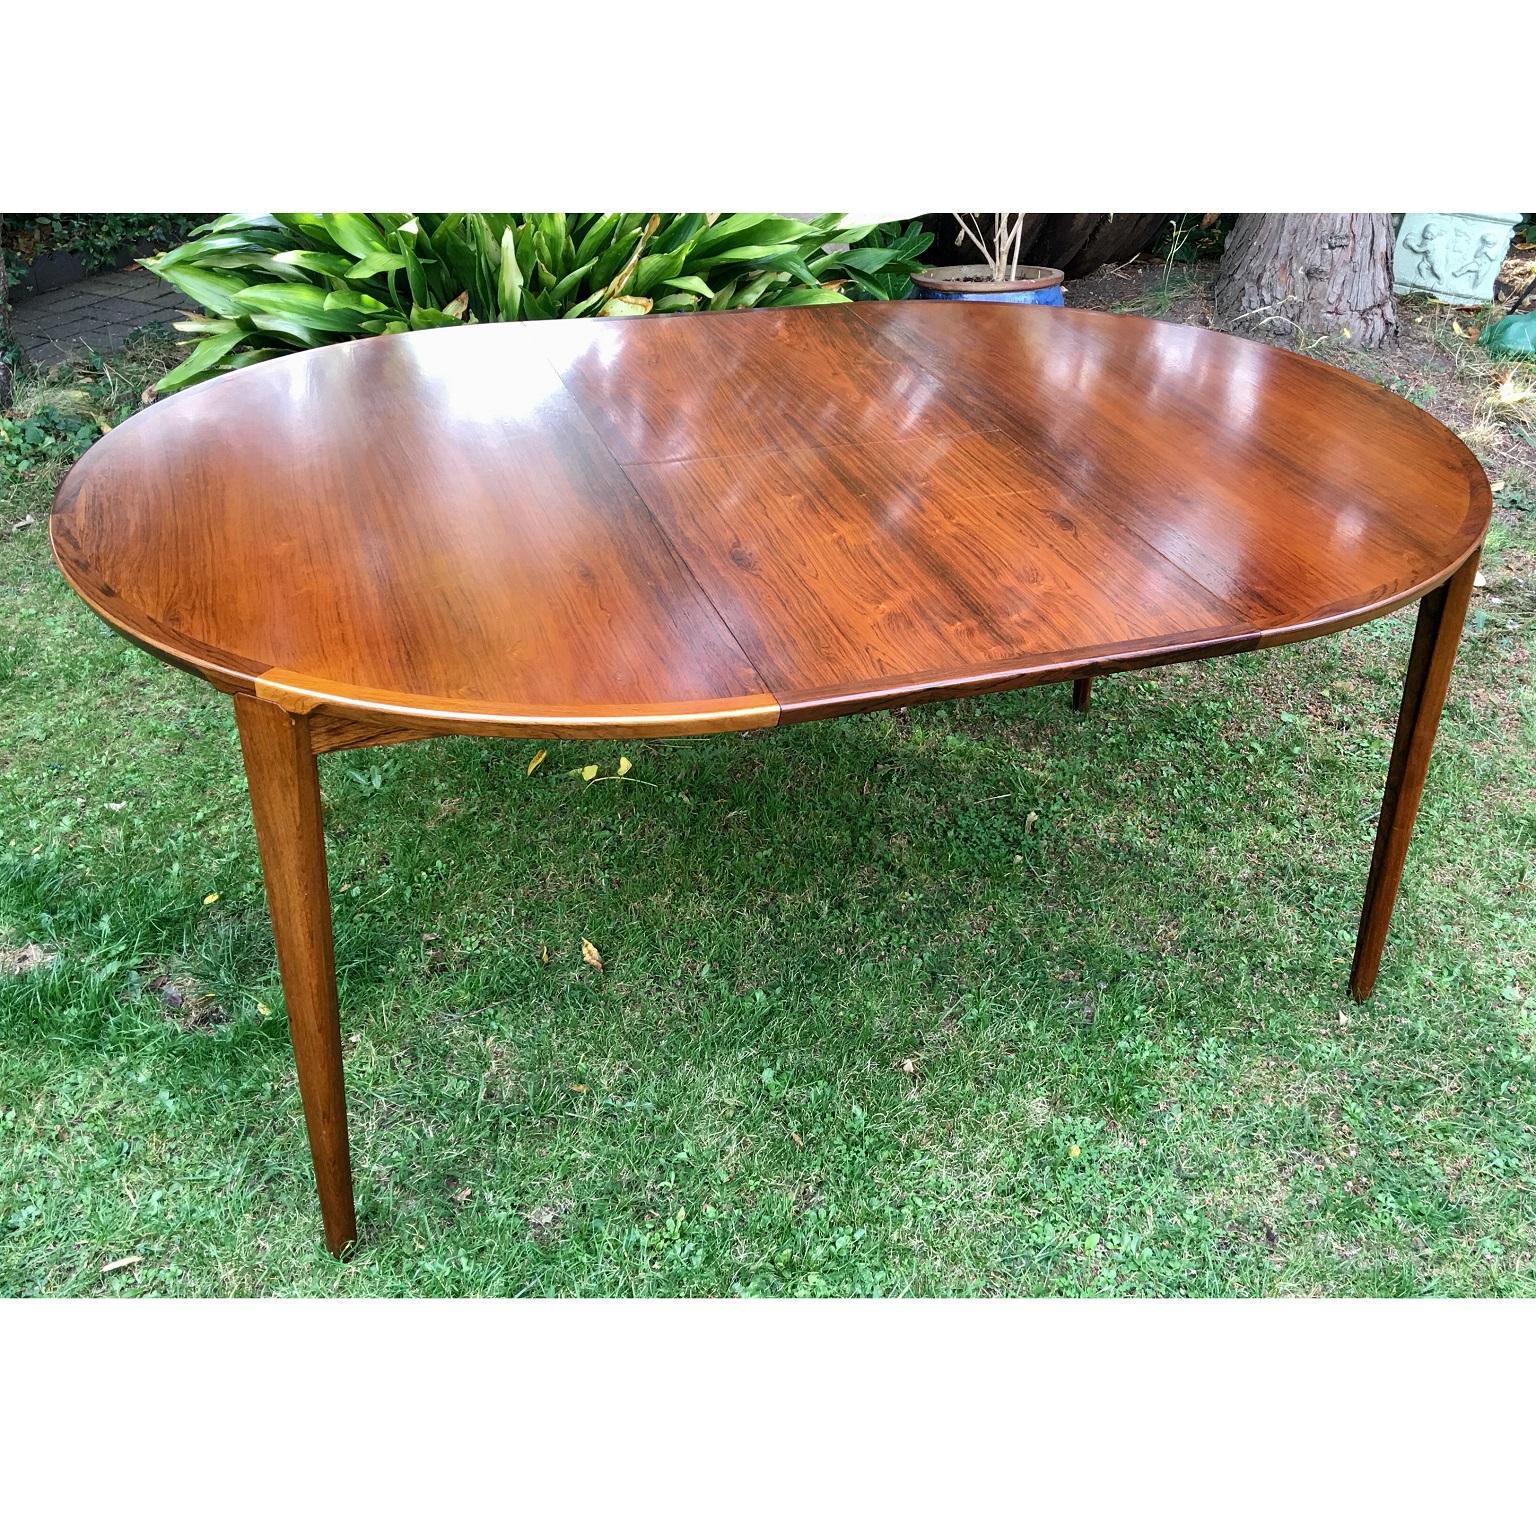 Danish Rosewood dining table by Henry Rosengren Hansen, circa 1960s
Midcentury Danish round dining table by Henry Rosengren Hansen. Made in Denmark in the 1960s
The Table has 4 legs, with stunning detail where it joins the table. The table comes